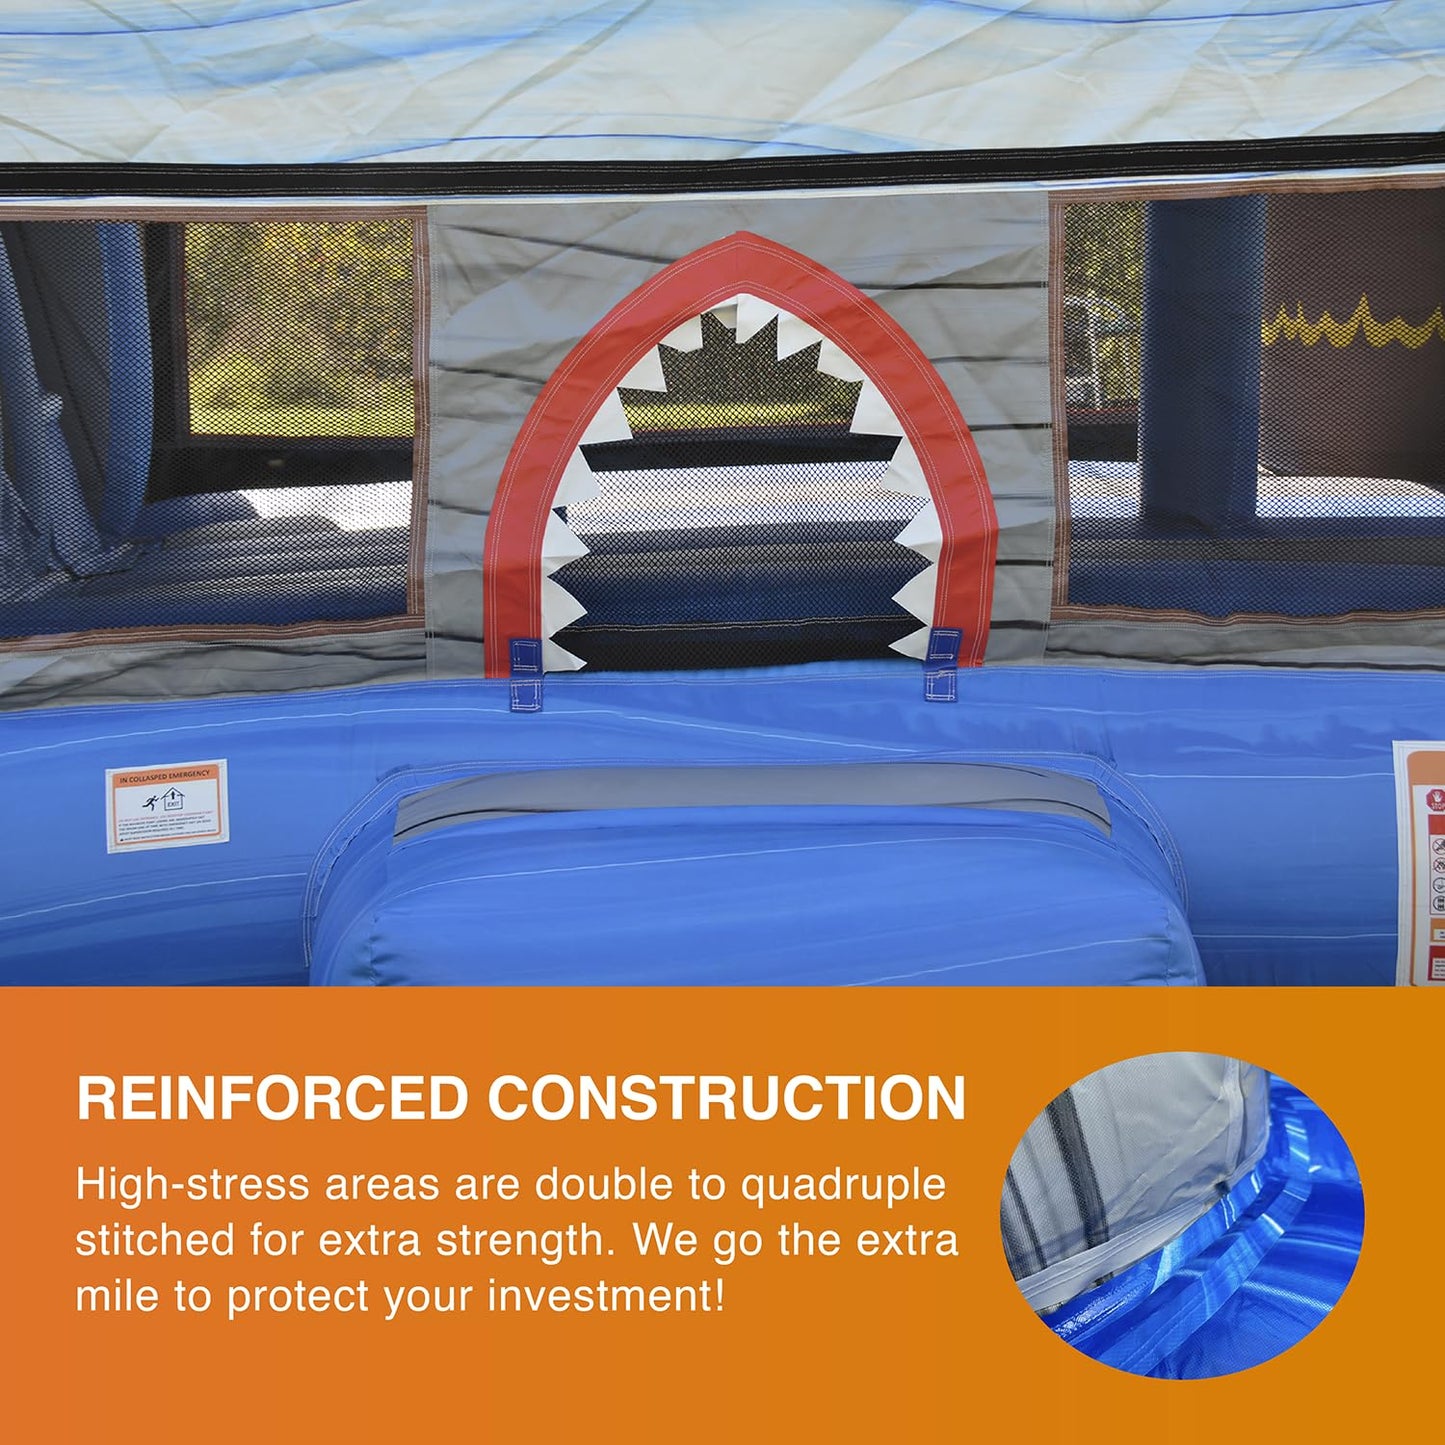 JumpOrange Shark Commercial Grade Bounce House Water Slide with Pool (with Blower), Kids and Adults, Wet Dry Combo, Basketball Hoop, Pop Up Obstacles, Climb Wall, Inflatable, Summer